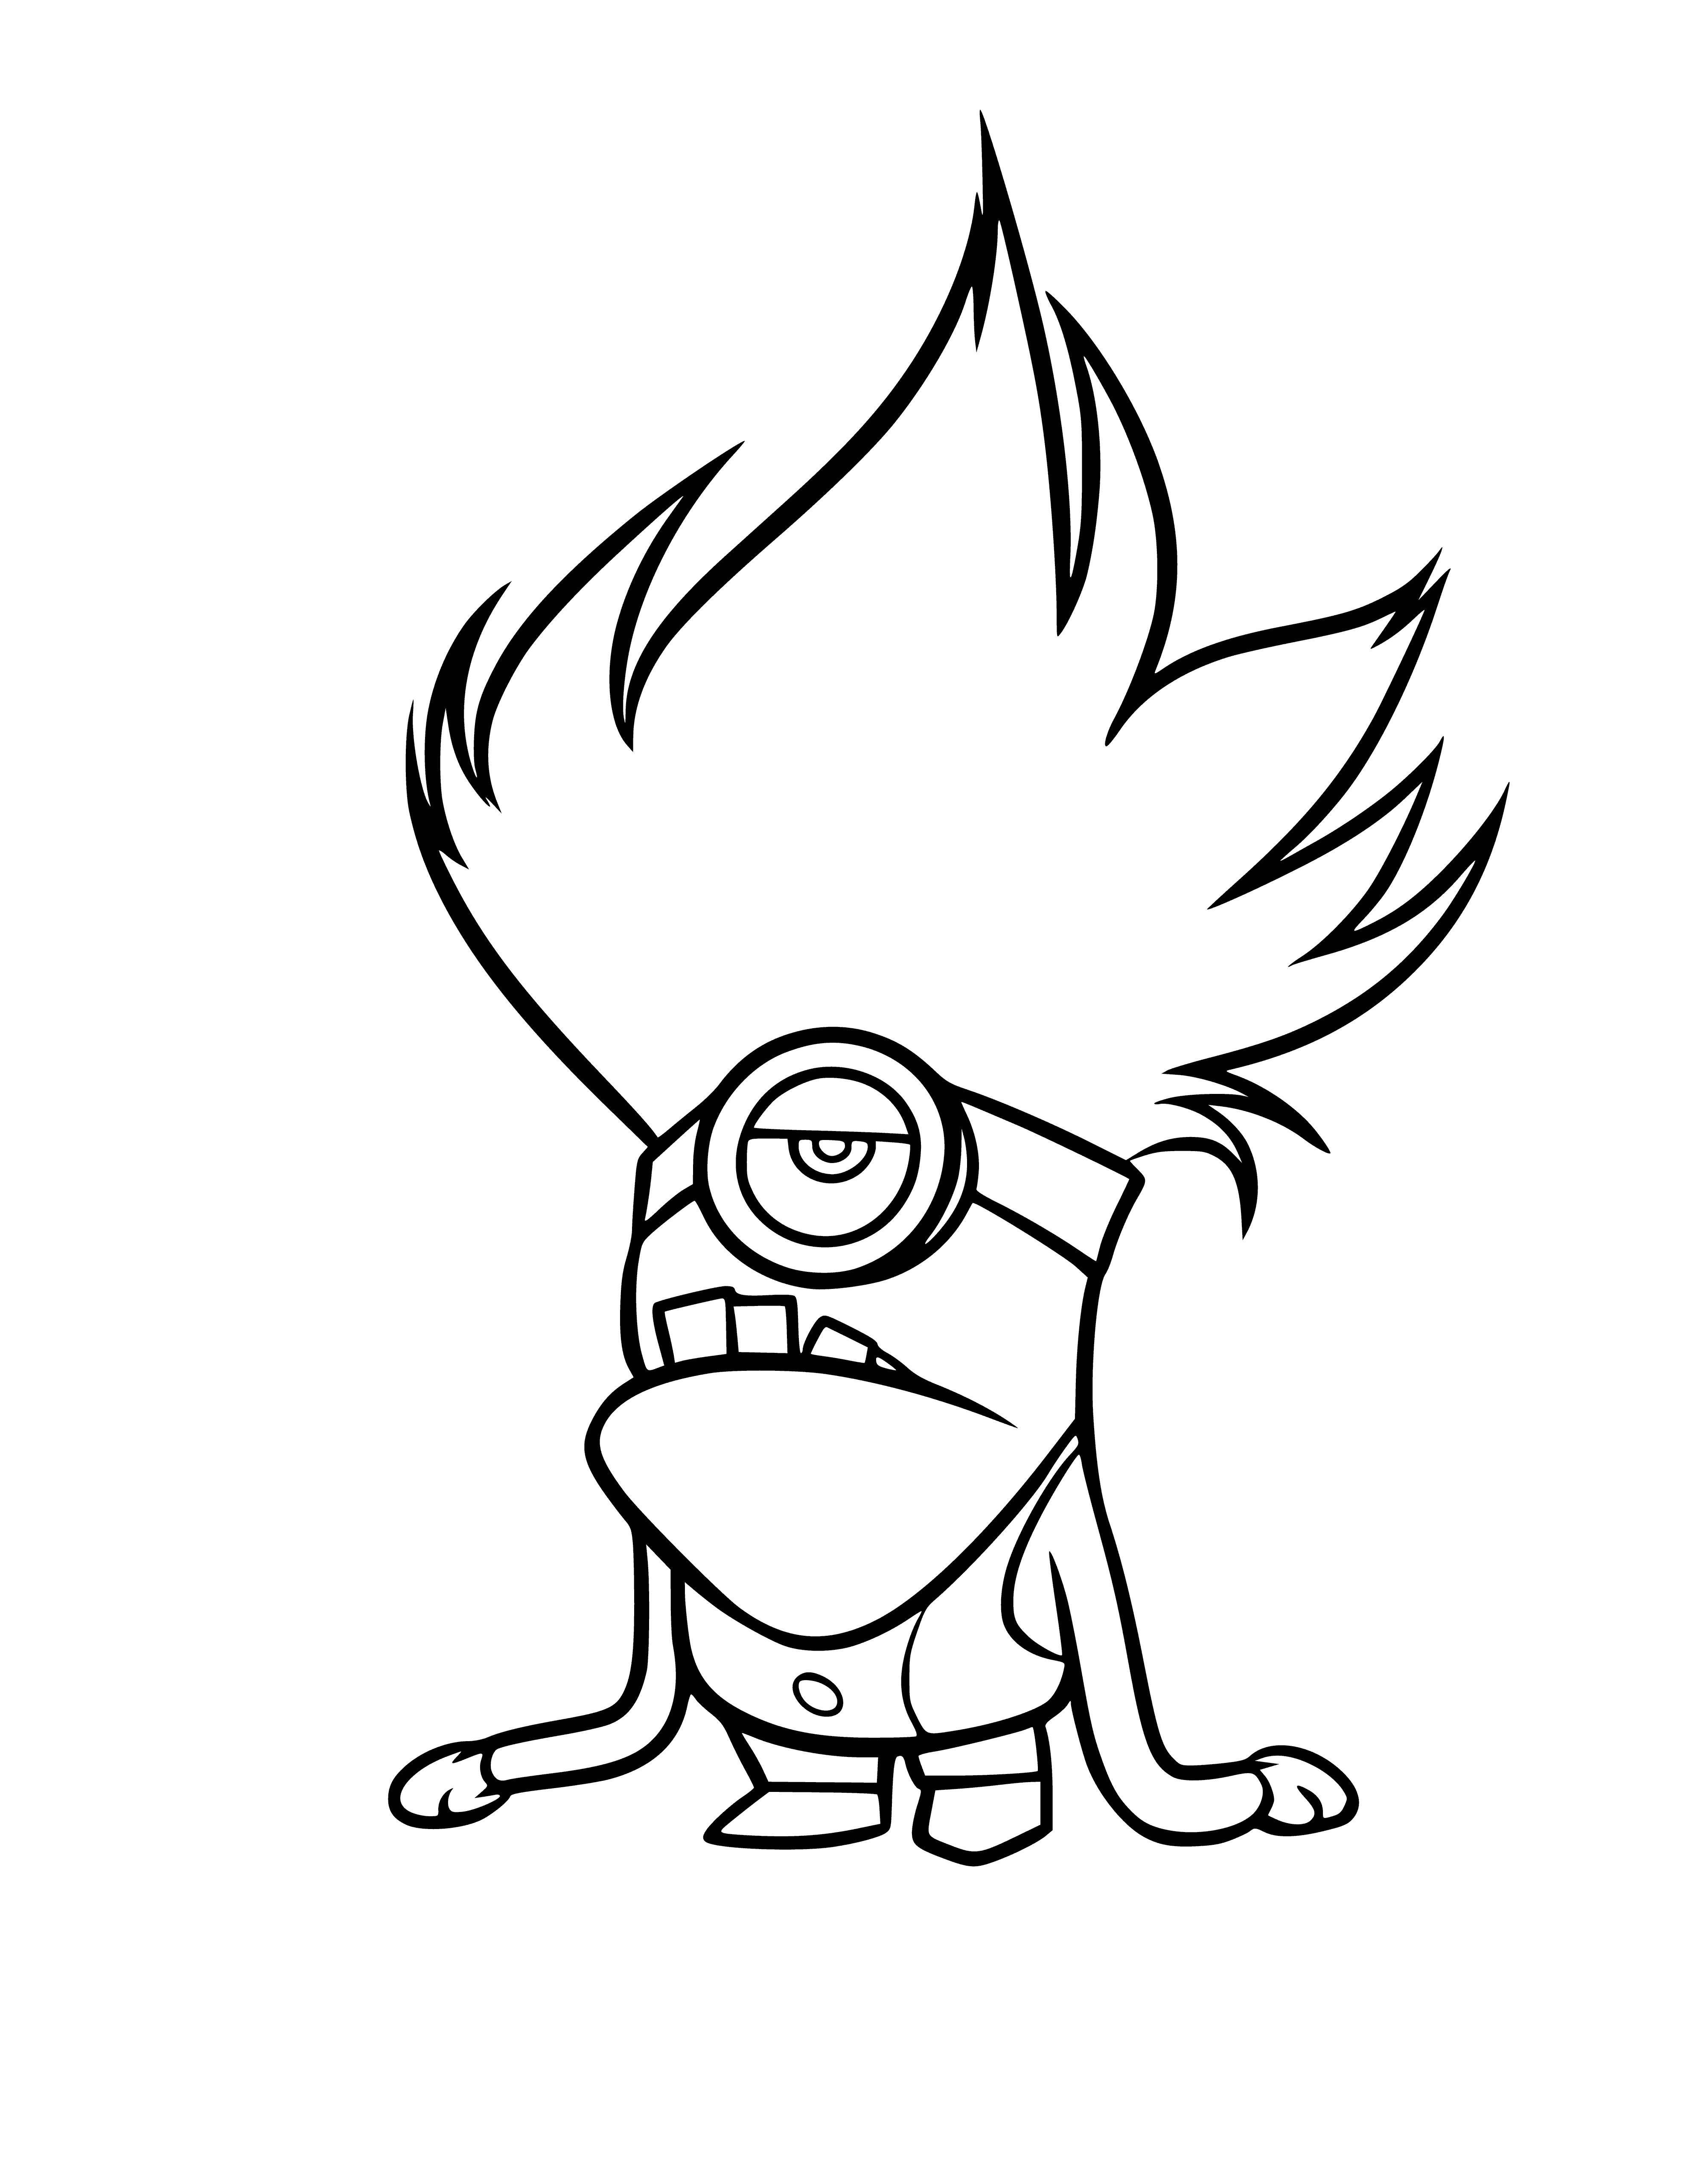 Bad minion coloring page